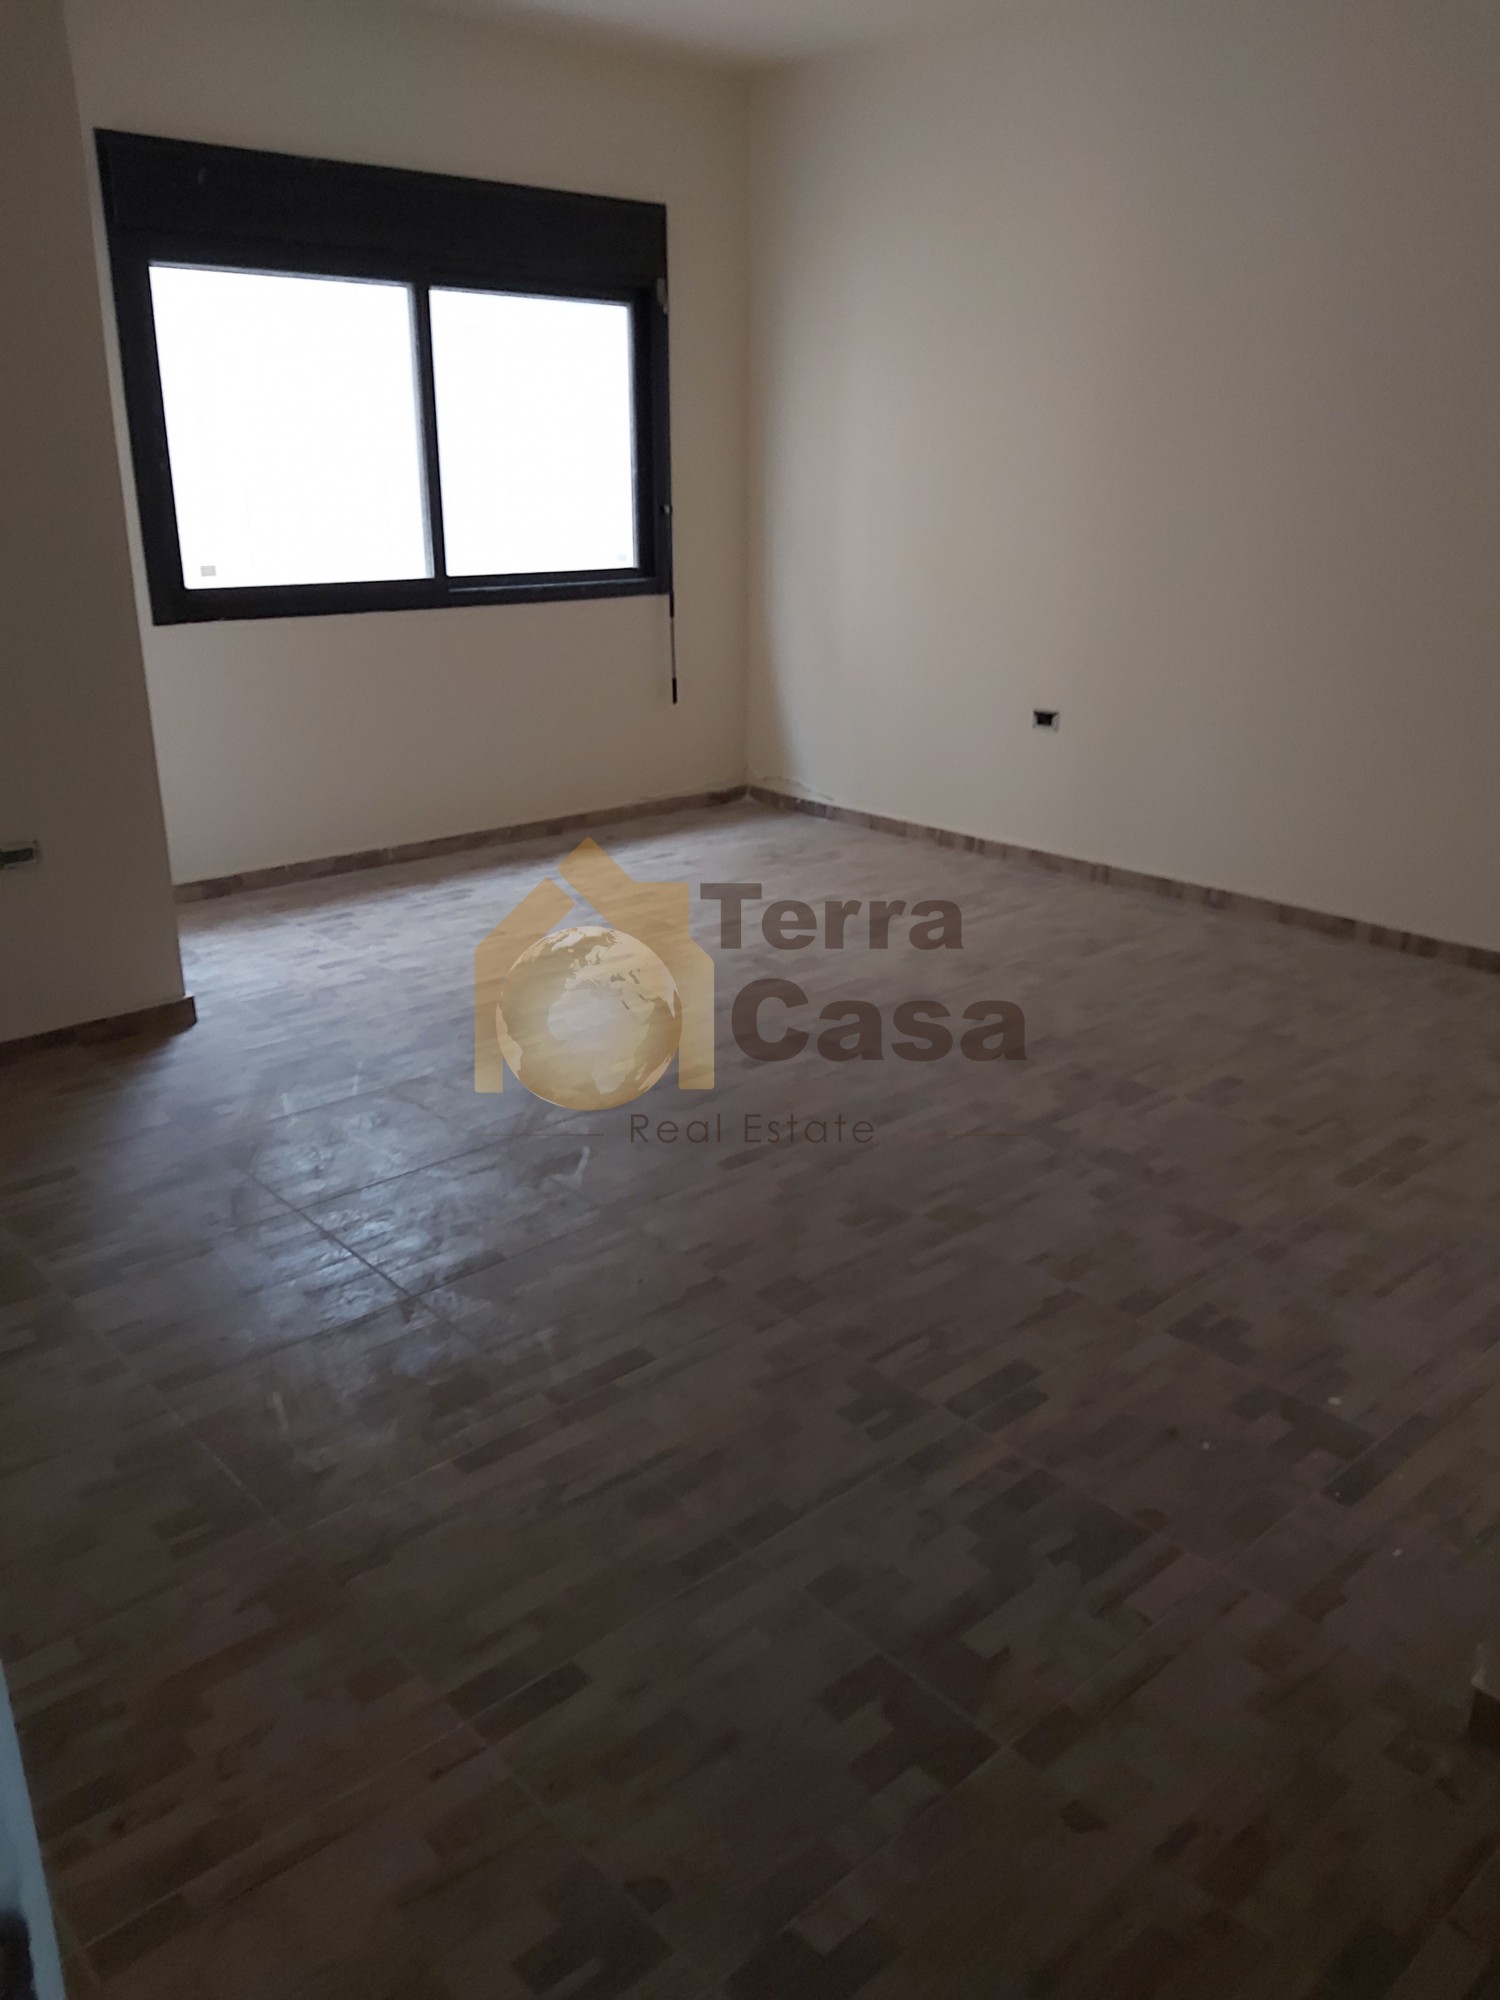 Brand new Duplex with 20 sqm terrace cash payment.